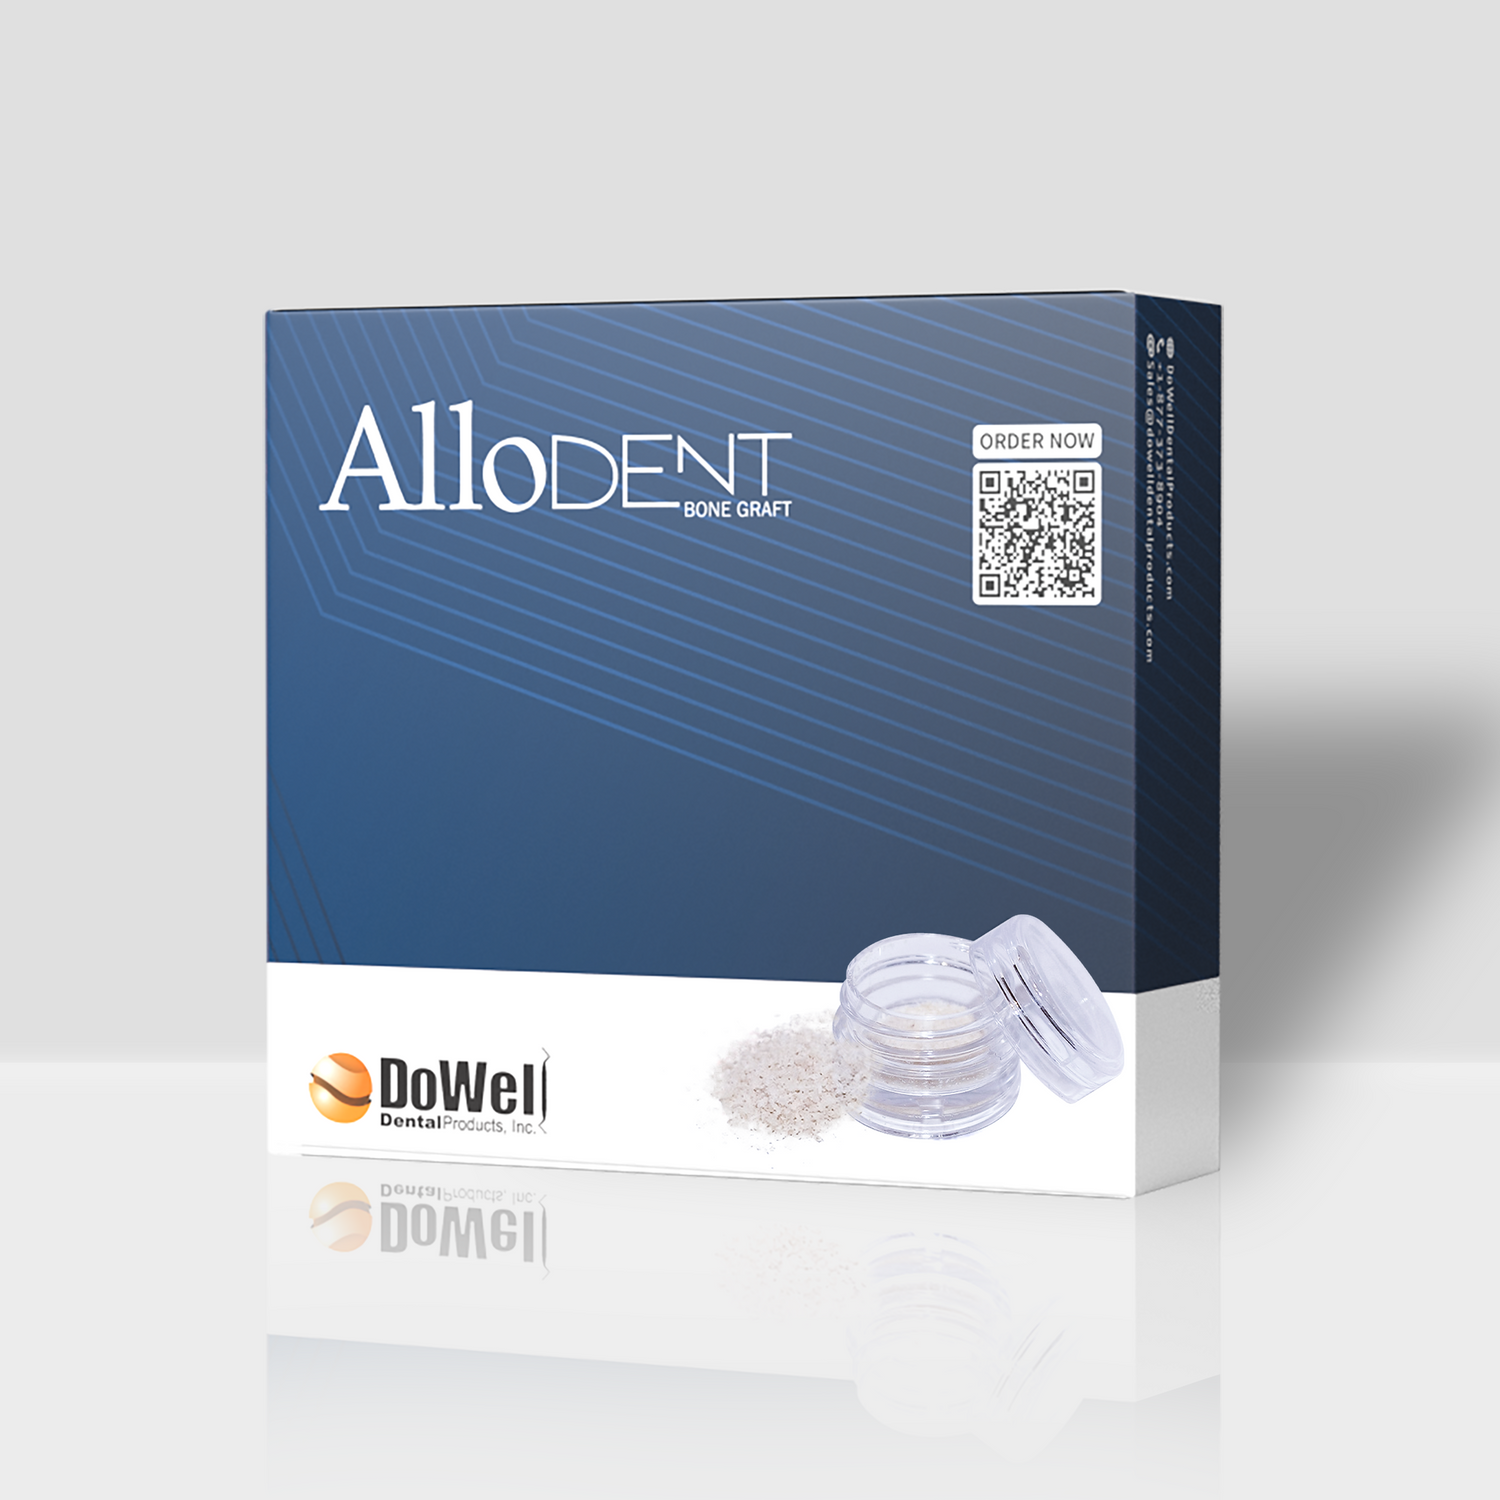 AlloDENT Special Offer